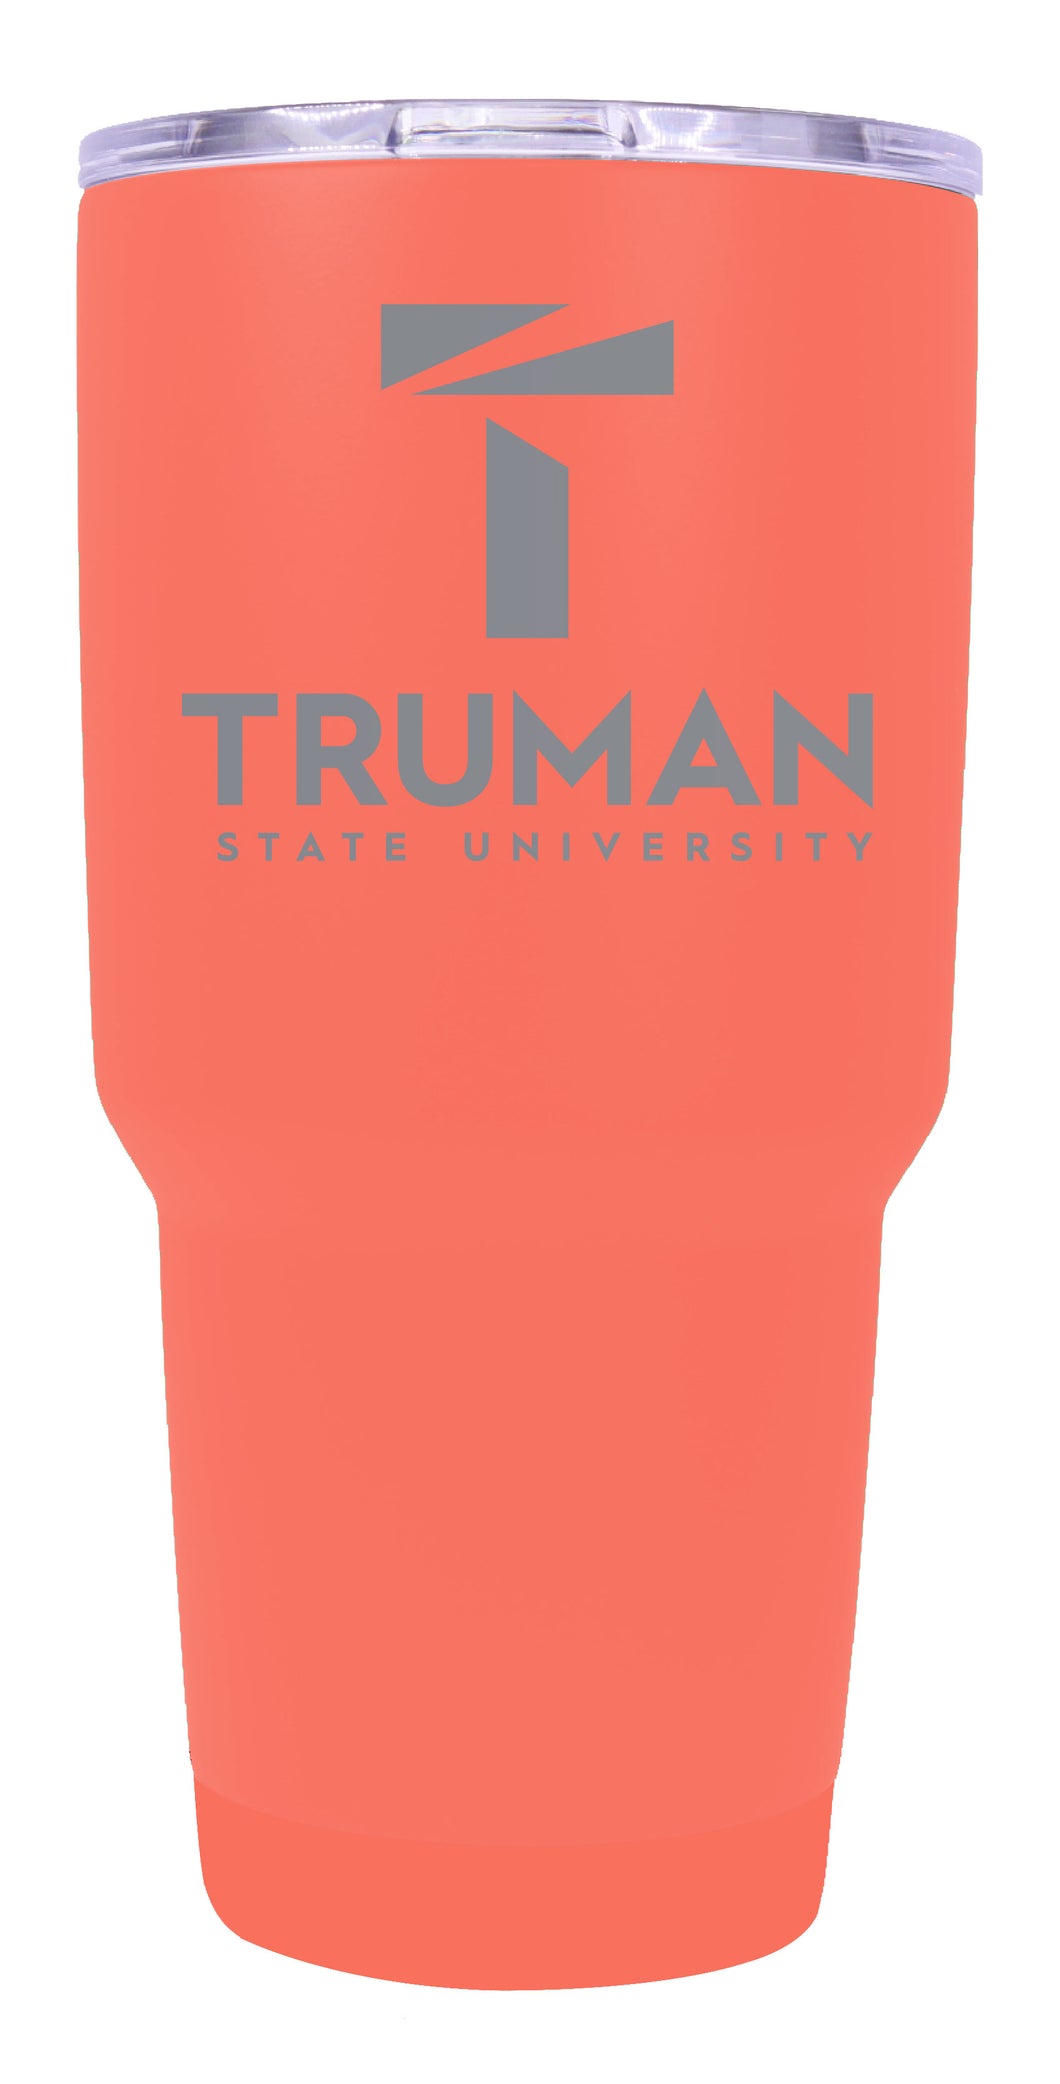 Truman State University Premium Laser Engraved Tumbler - 24oz Stainless Steel Insulated Mug Choose Your Color.